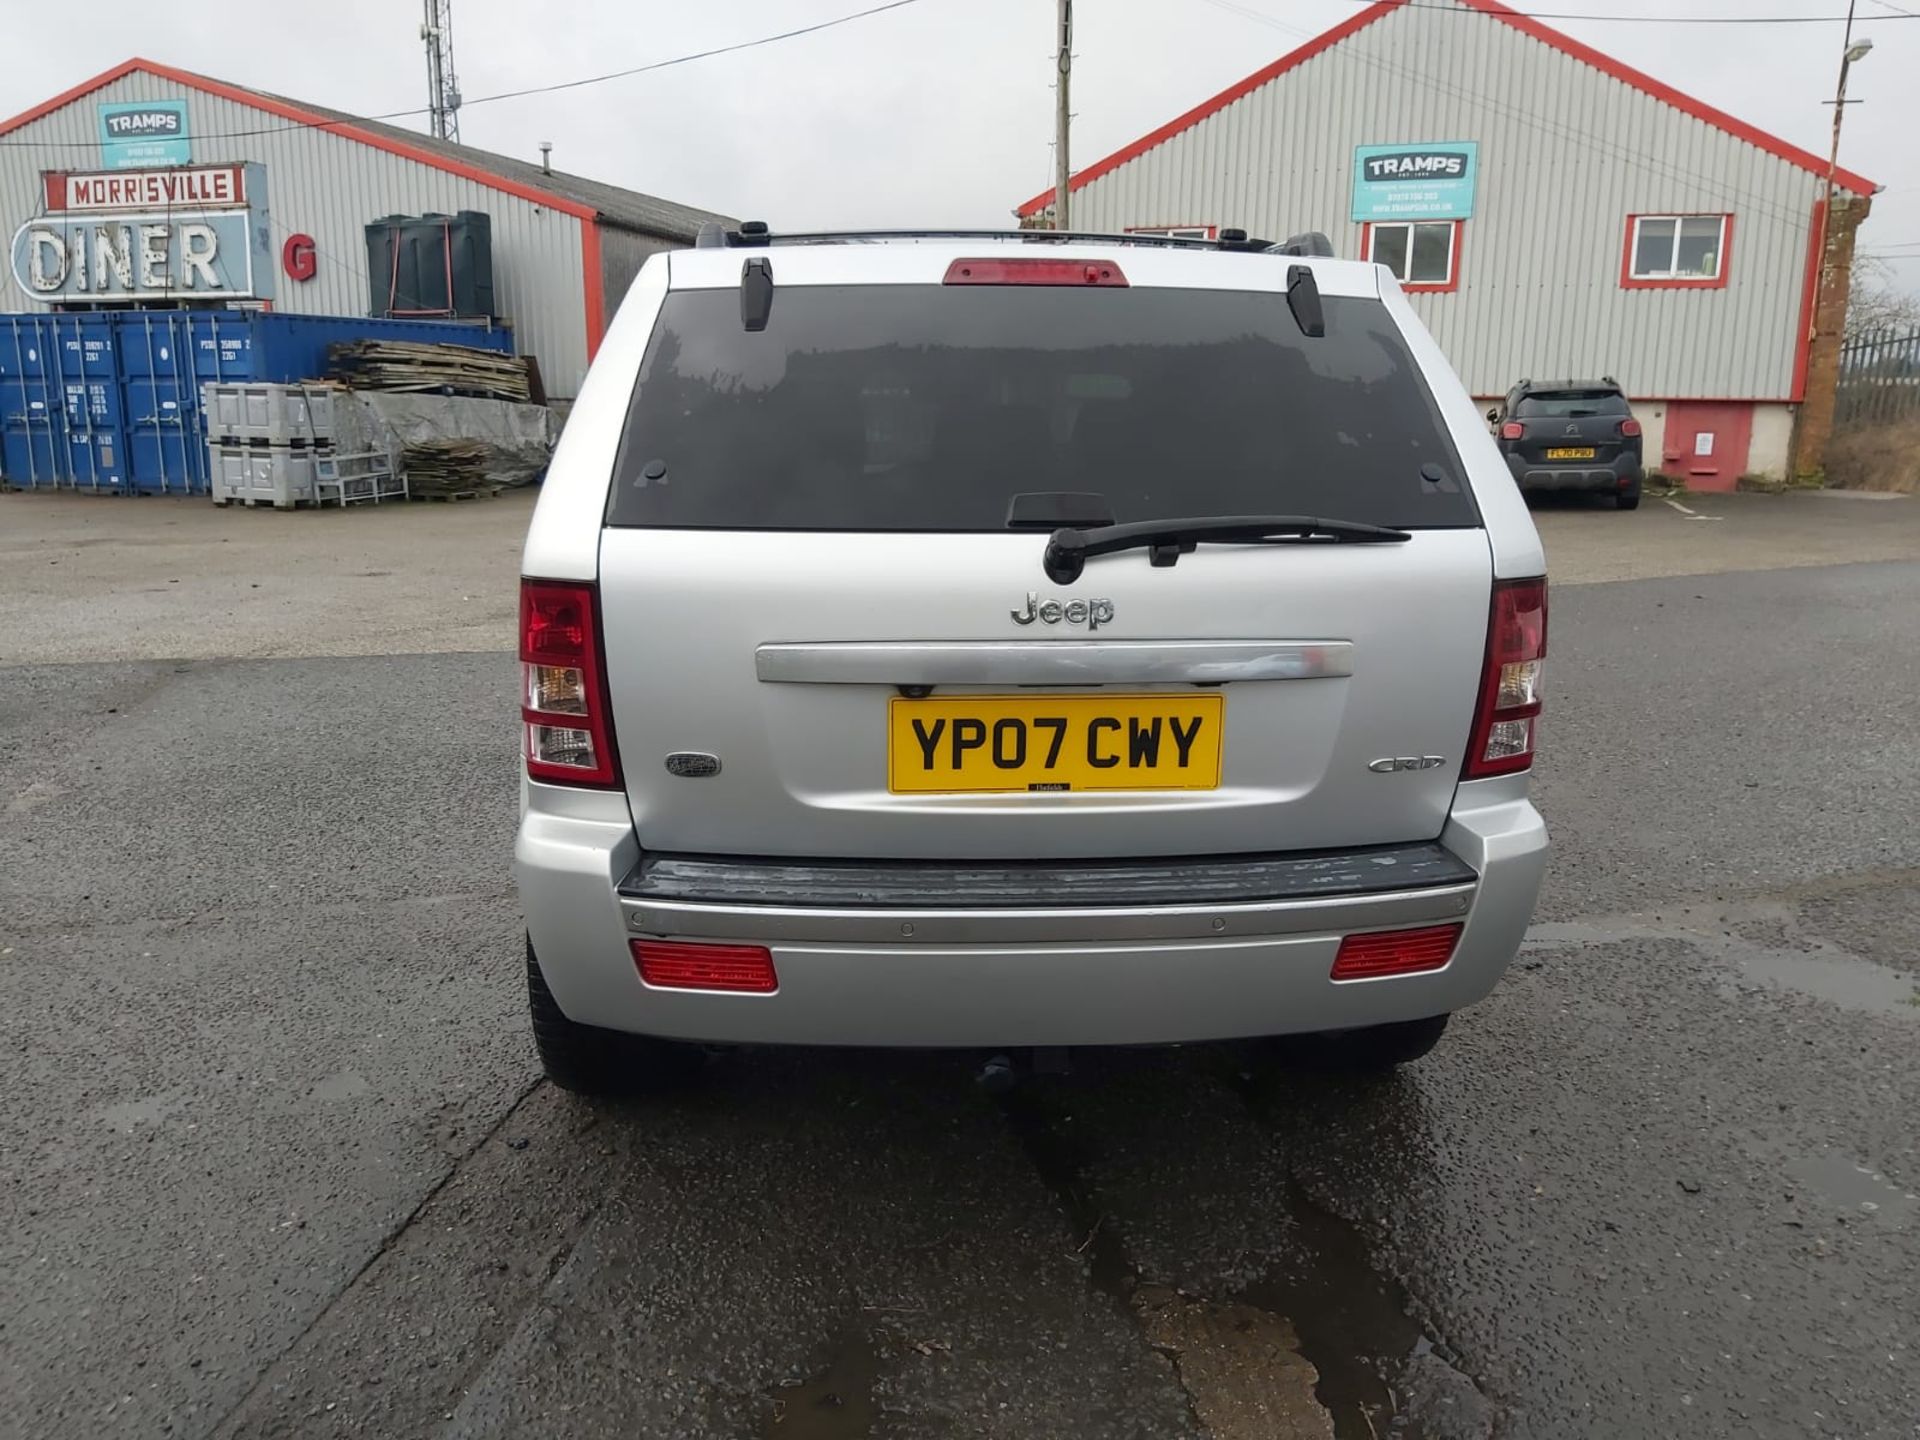 2007 JEEP G-CHEROKEE OVERLAND CRD A SILVER SUV ESTATE *NO VAT* - Image 6 of 17